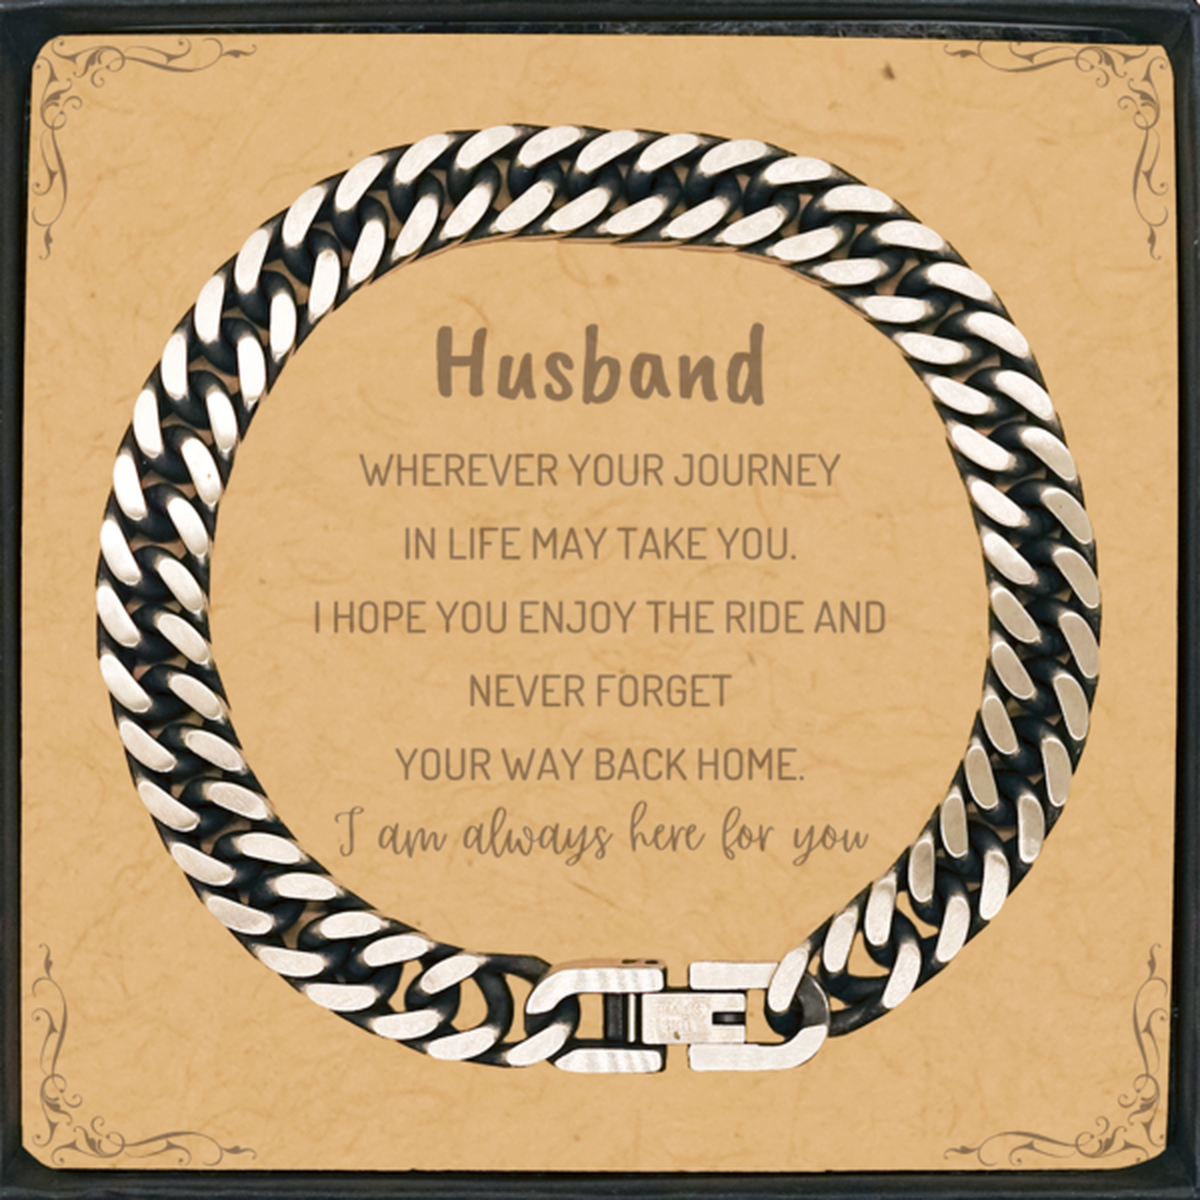 Husband wherever your journey in life may take you, I am always here for you Husband Cuban Link Chain Bracelet, Awesome Christmas Gifts For Husband Message Card, Husband Birthday Gifts for Men Women Family Loved One